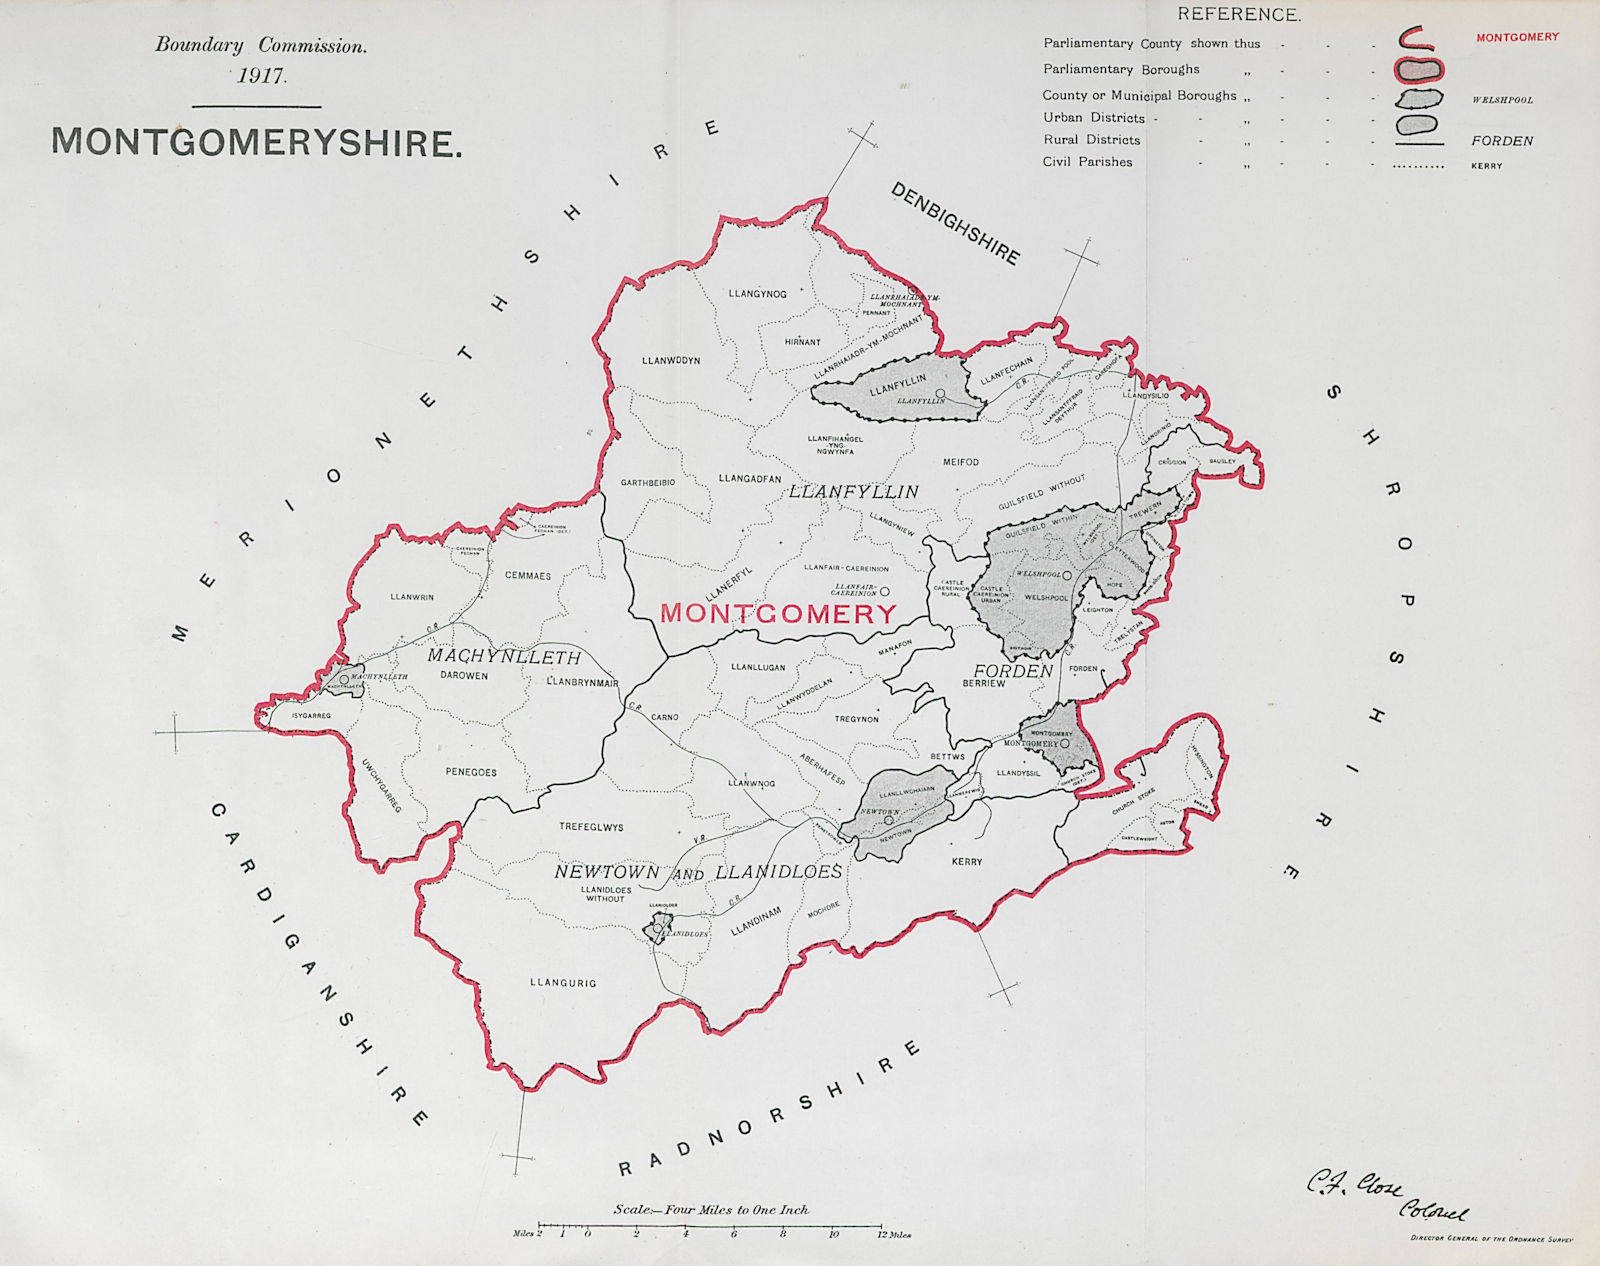 Montgomeryshire Parliamentary County. BOUNDARY COMMISSION. Close 1917 old map